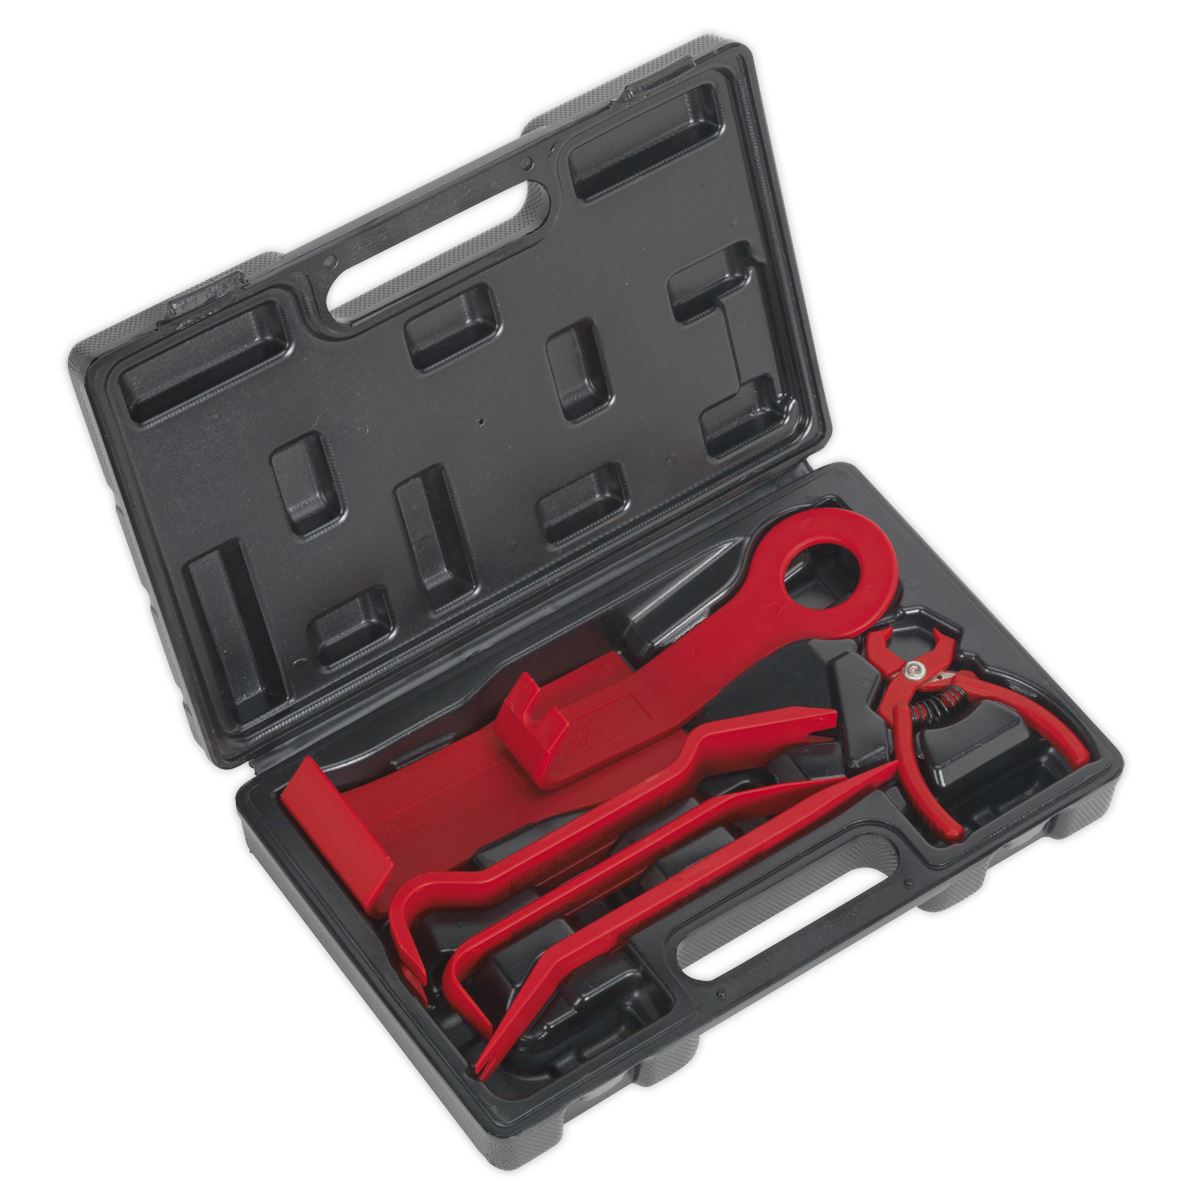 Sealey 6 Piece Trim & Upholstery Set in Case Removal Pliers Car Interior